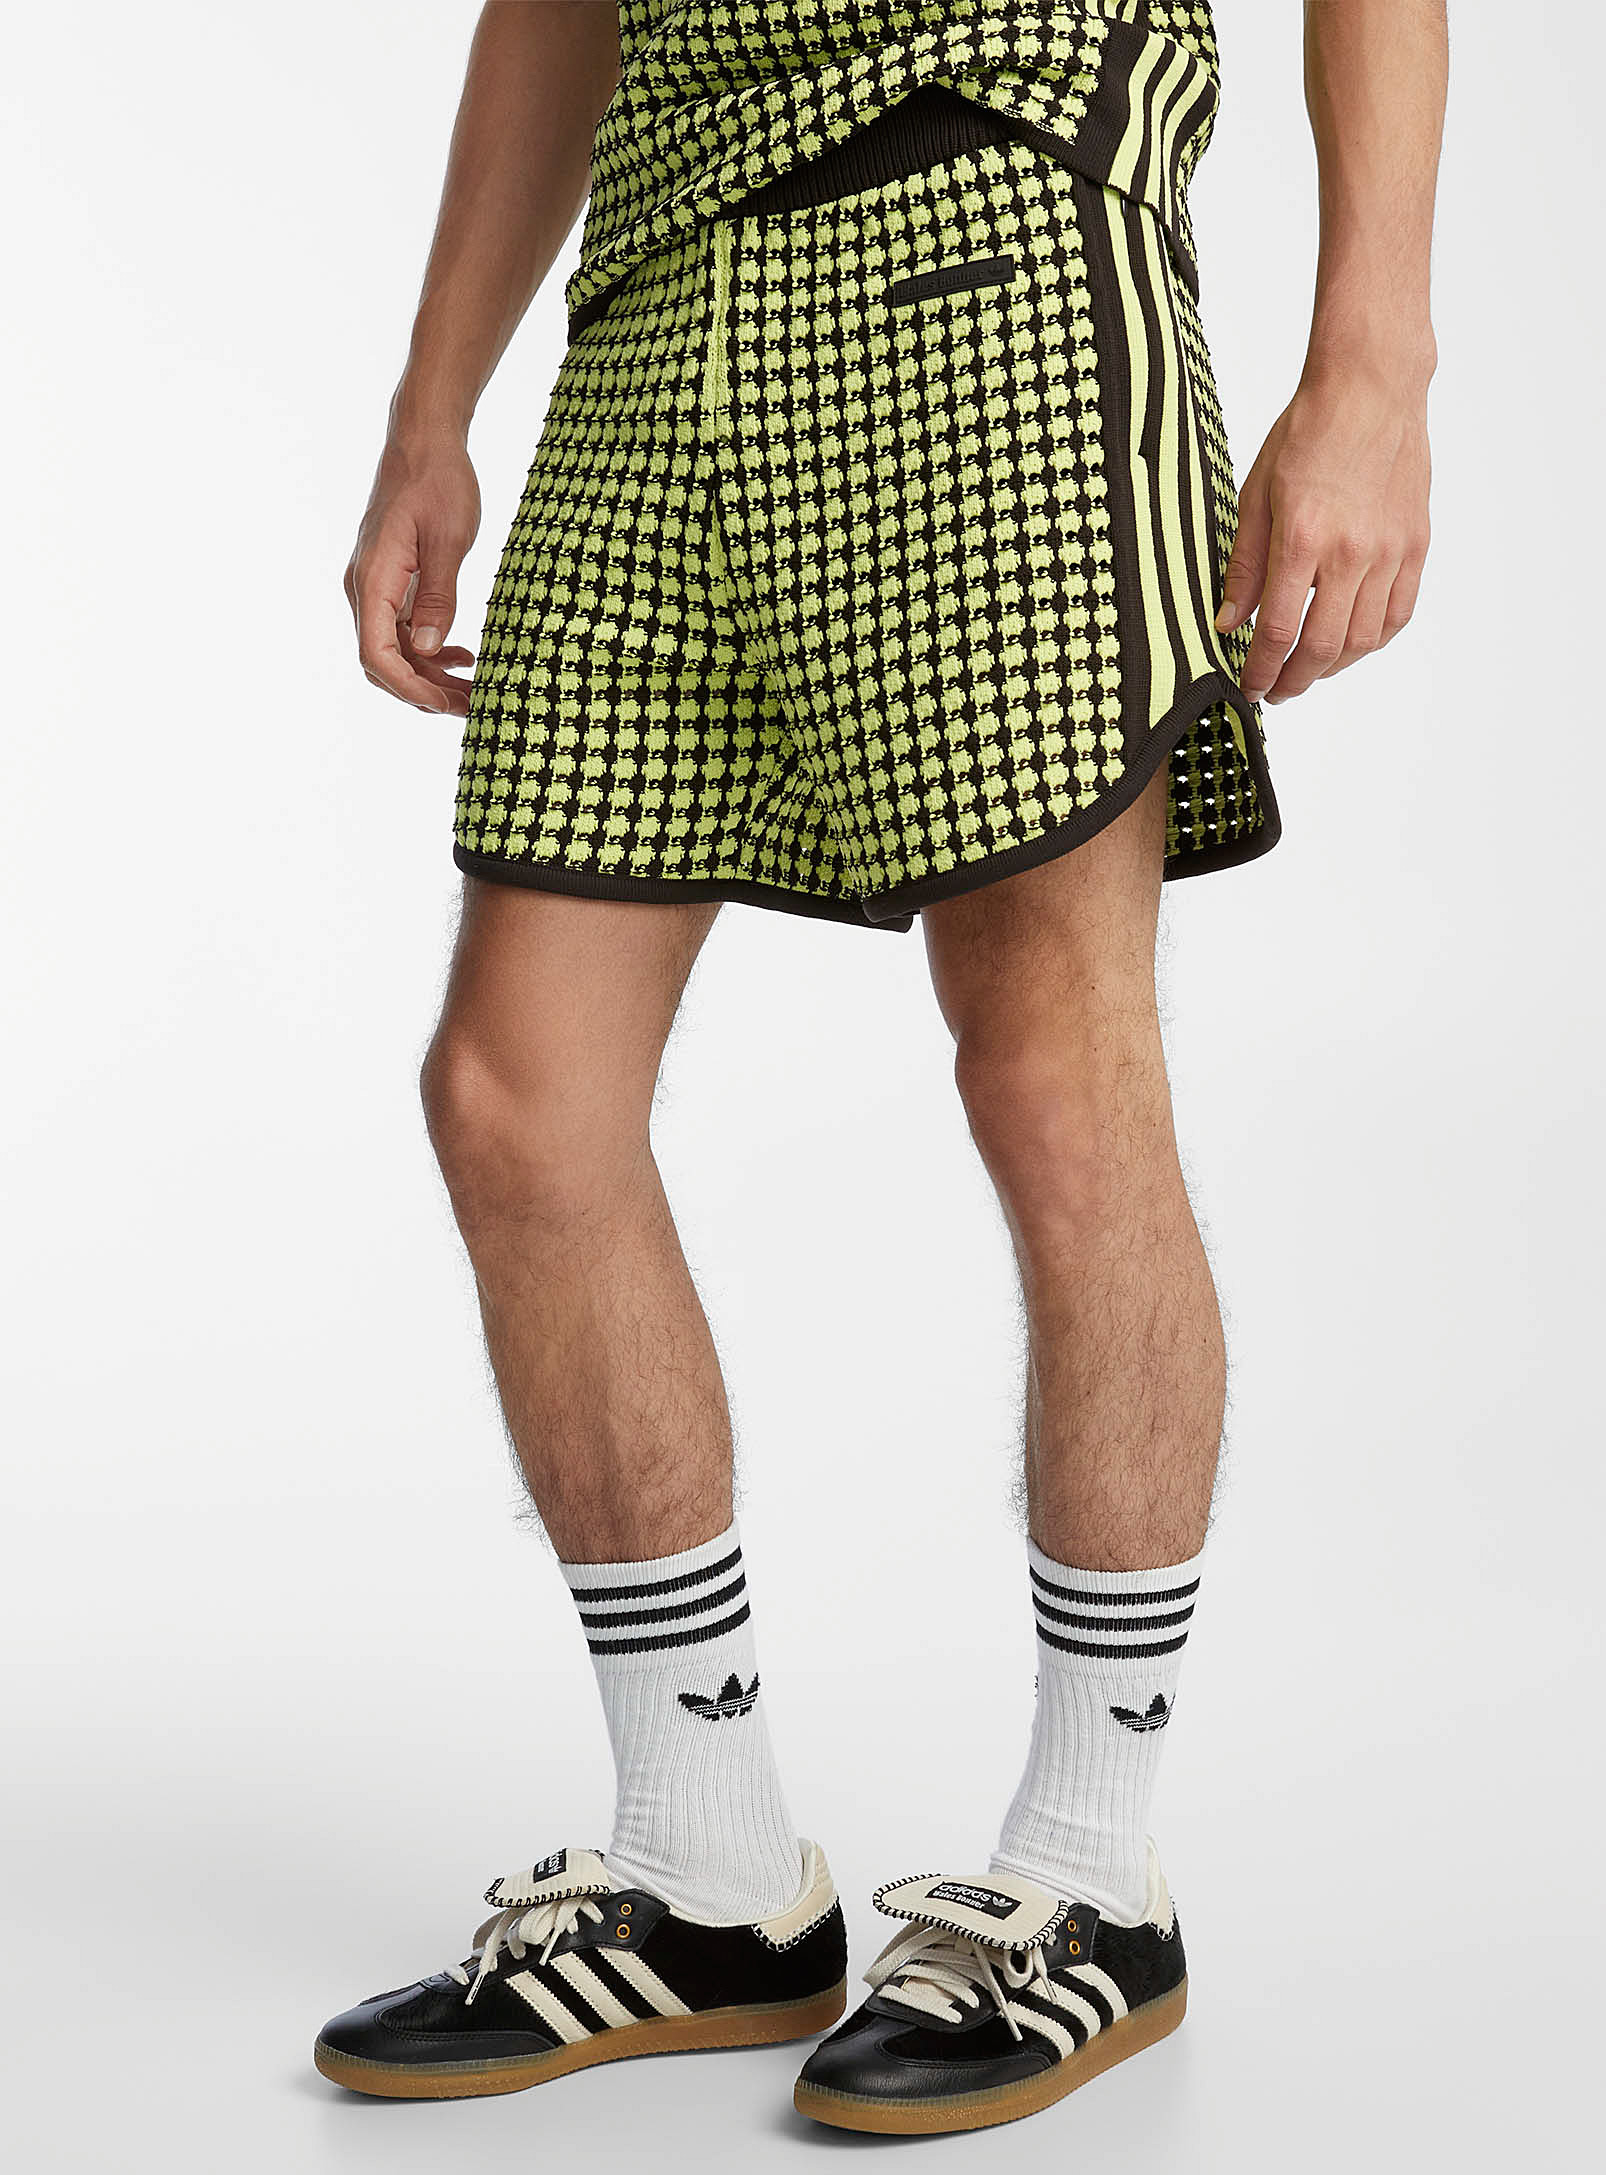 Adidas X Wales Bonner Graphic Knit Short In Patterned Green